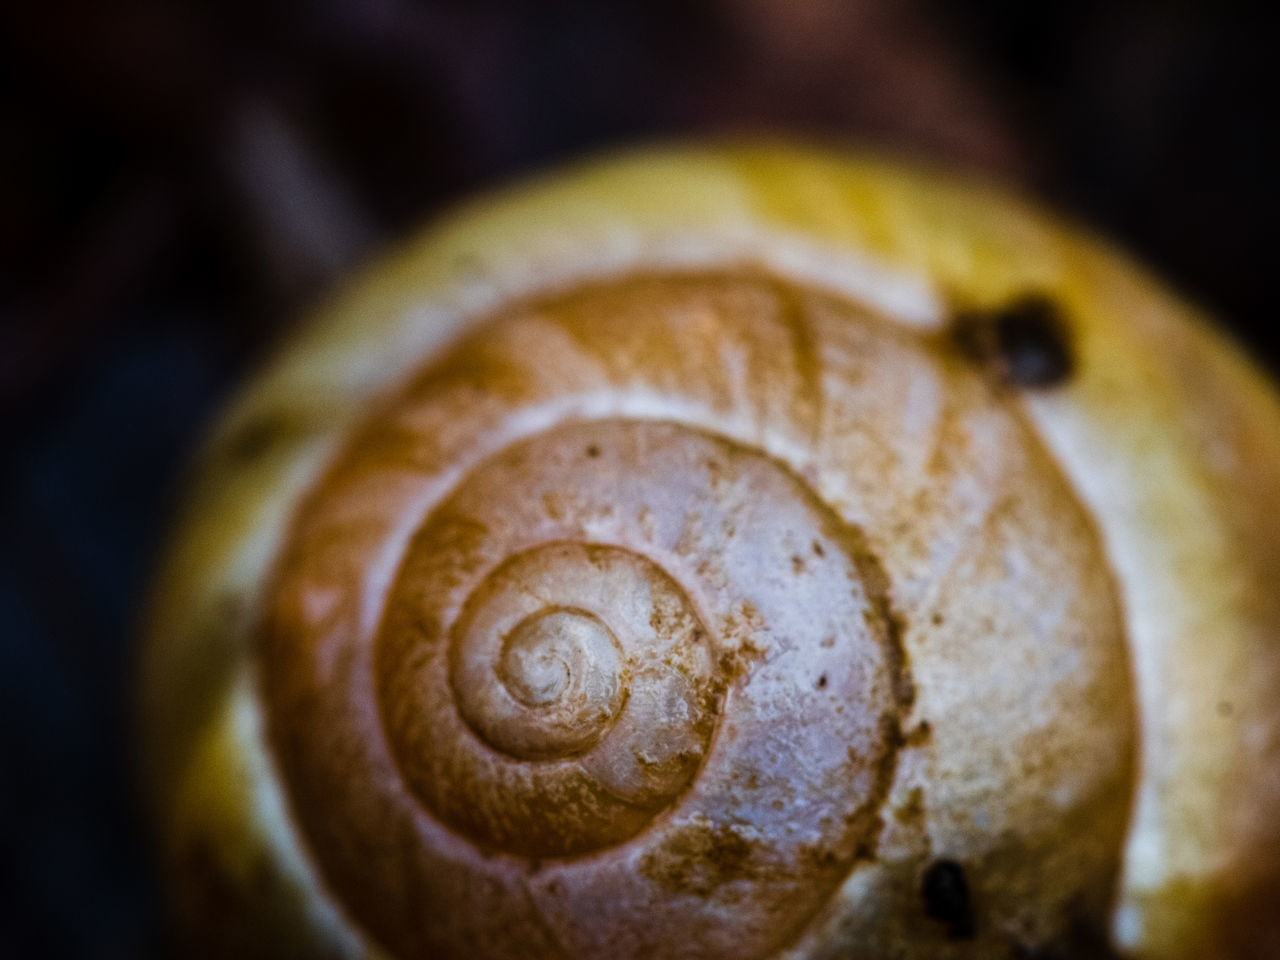 CLOSE-UP OF SNAIL ON THE GROUND